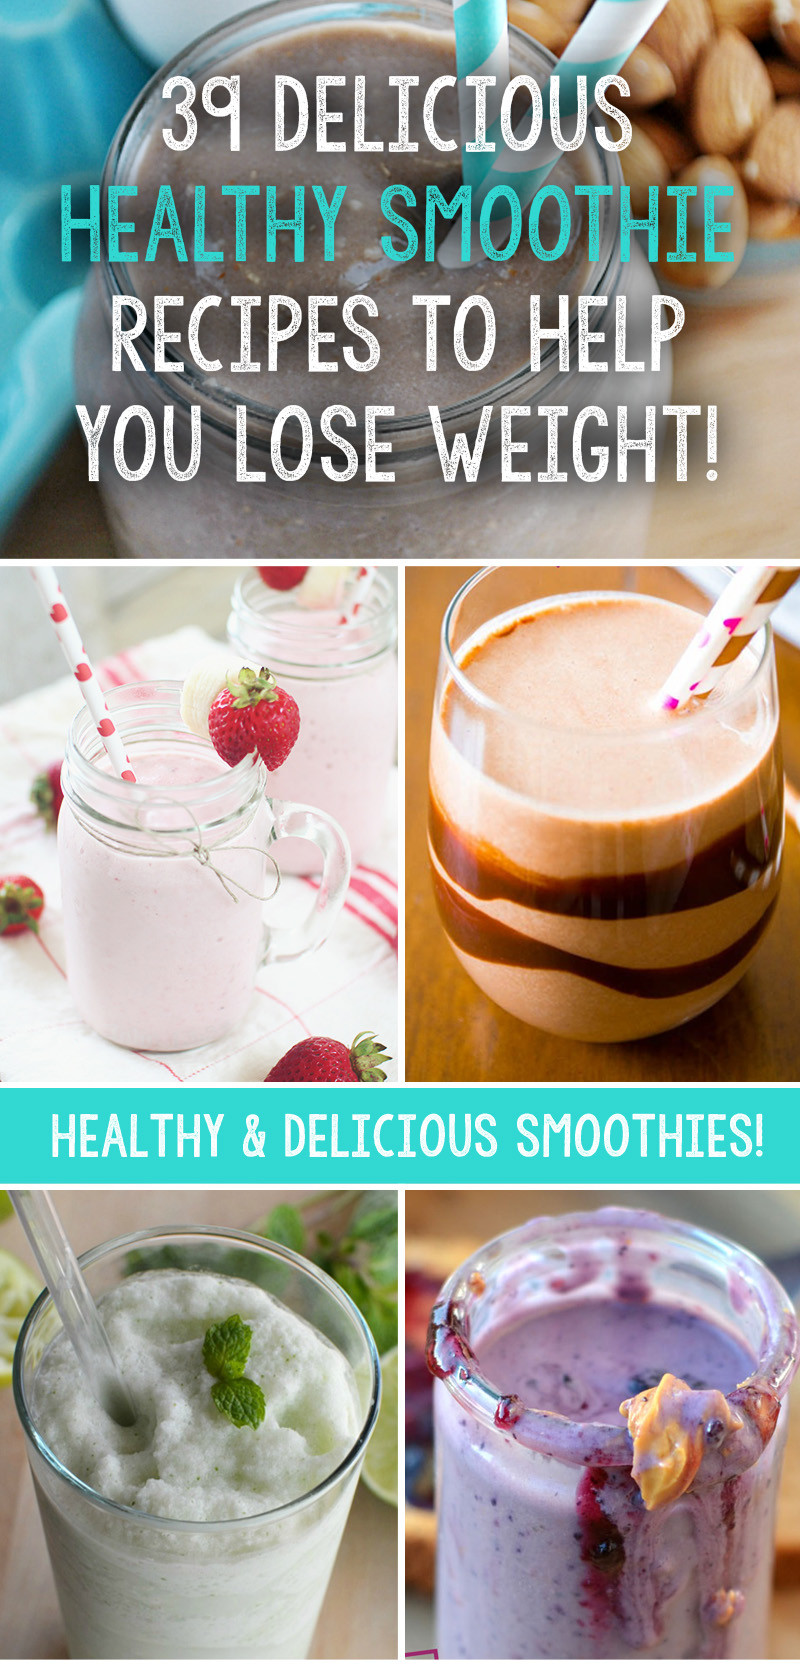 Loss Weight Smoothie Recipes
 39 Delicious Healthy Smoothie Recipes To Help You Lose